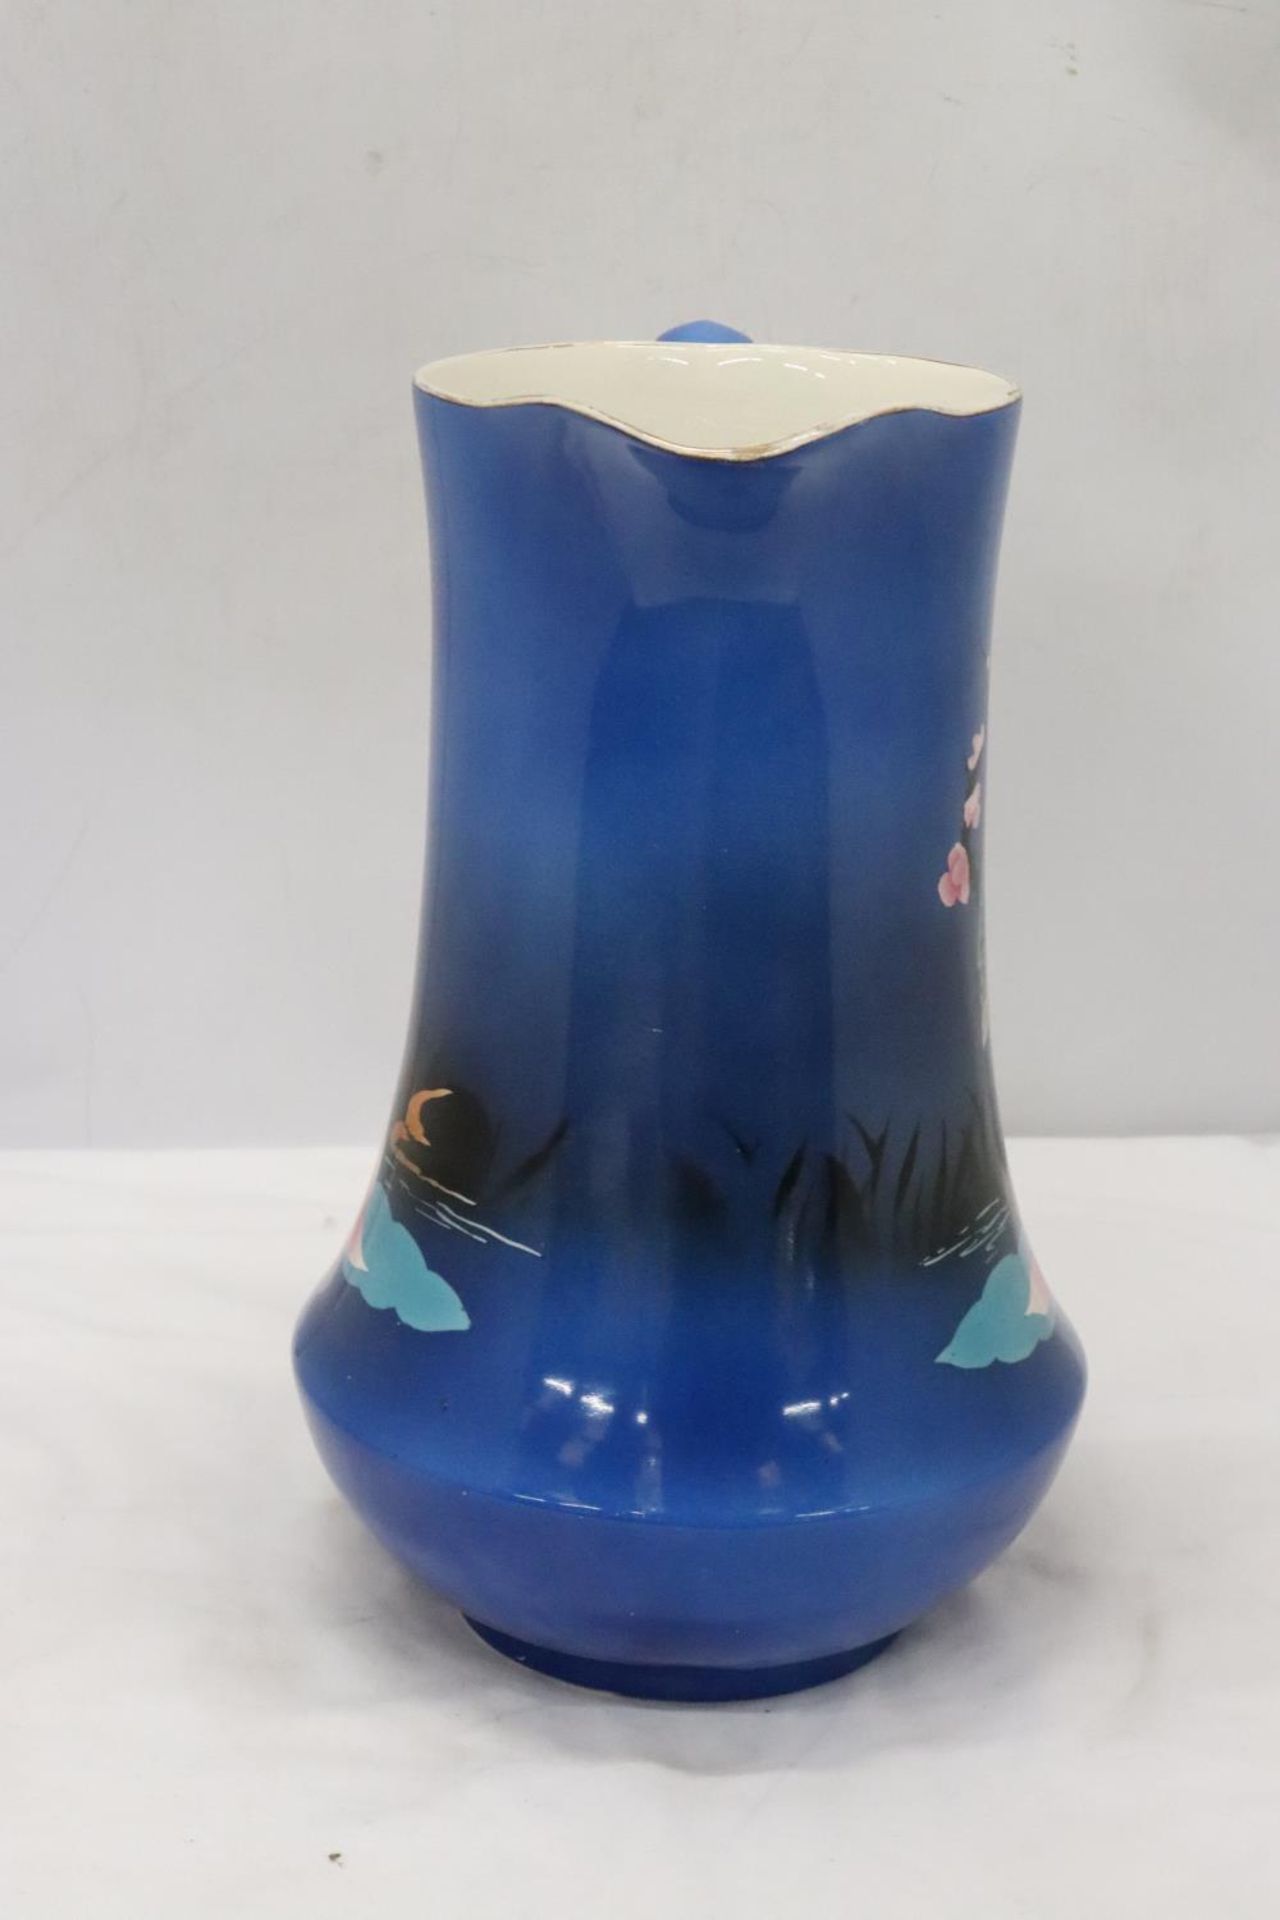 A LARGE ROYAL VENTON WARE (1930'S) JUG WITH KINGFISHER DESIGN - Image 2 of 6